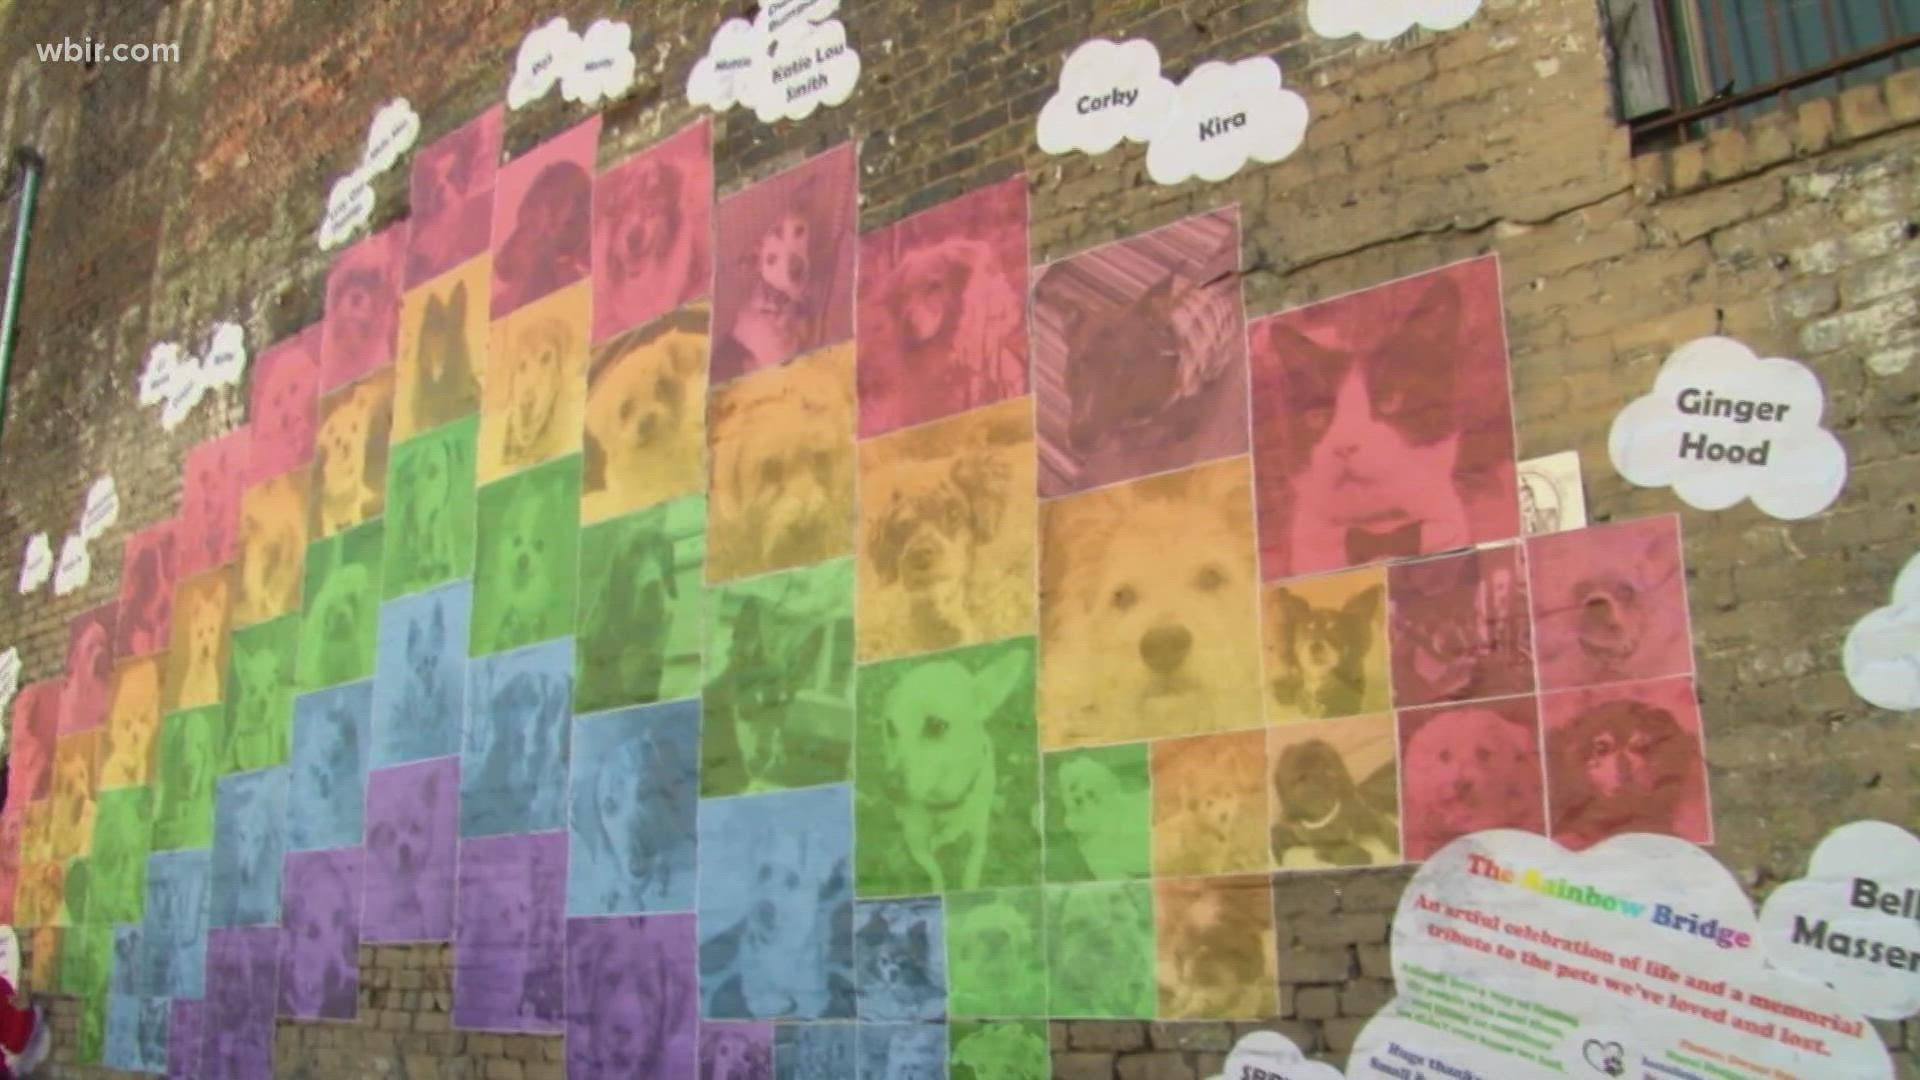 The Small Breed Rescue of East Tennessee helped put together a mural for pet owners.